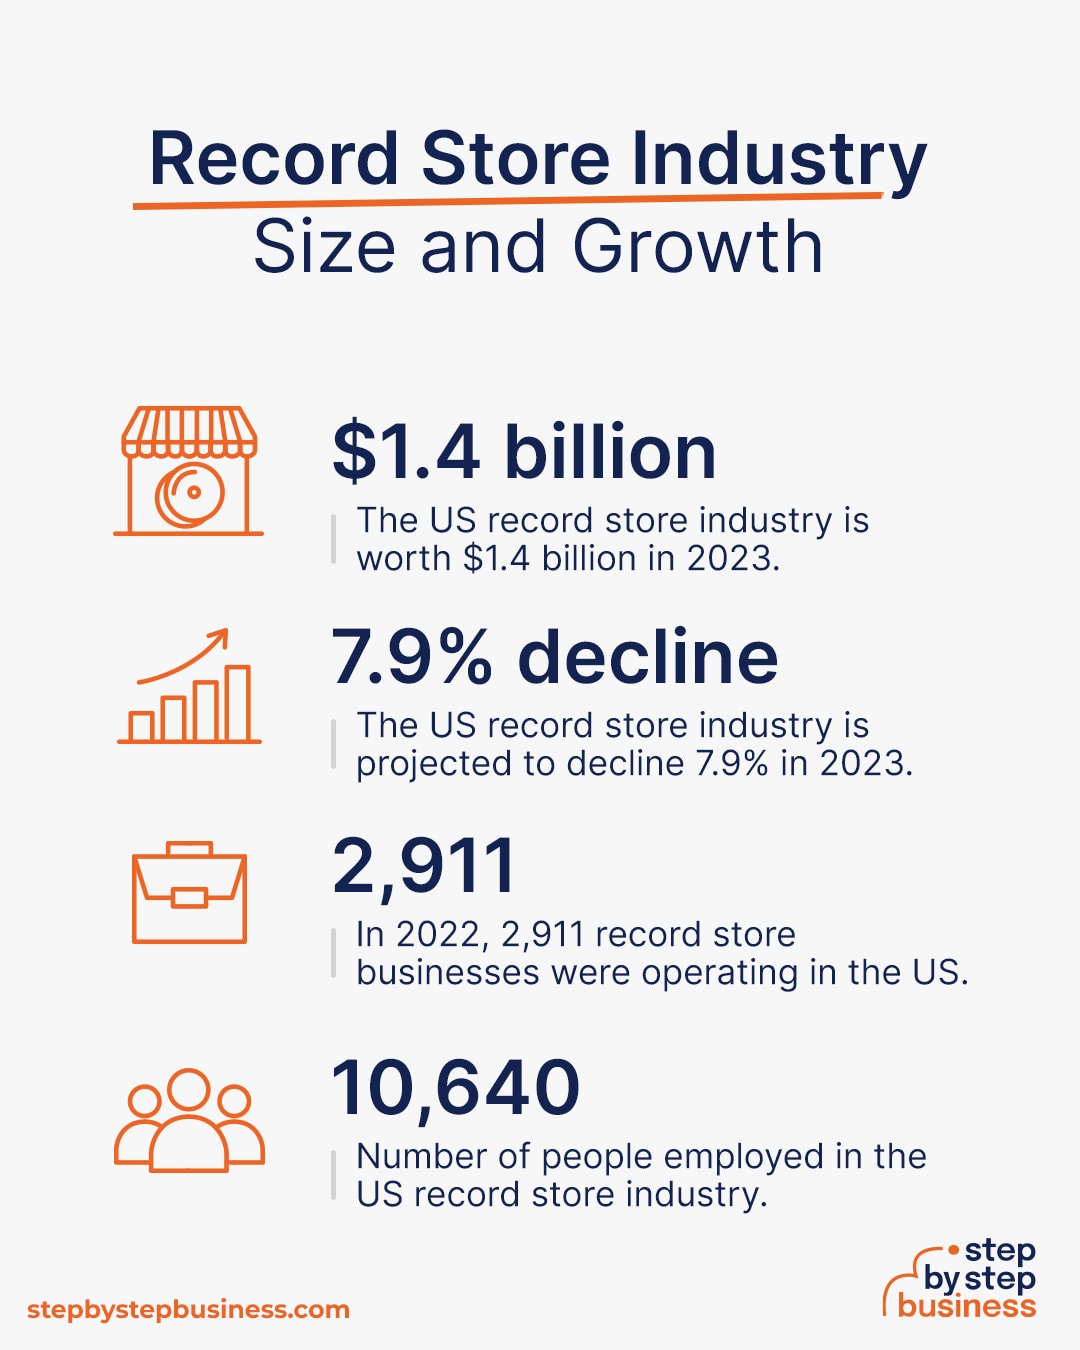 Record Store industry size and growth